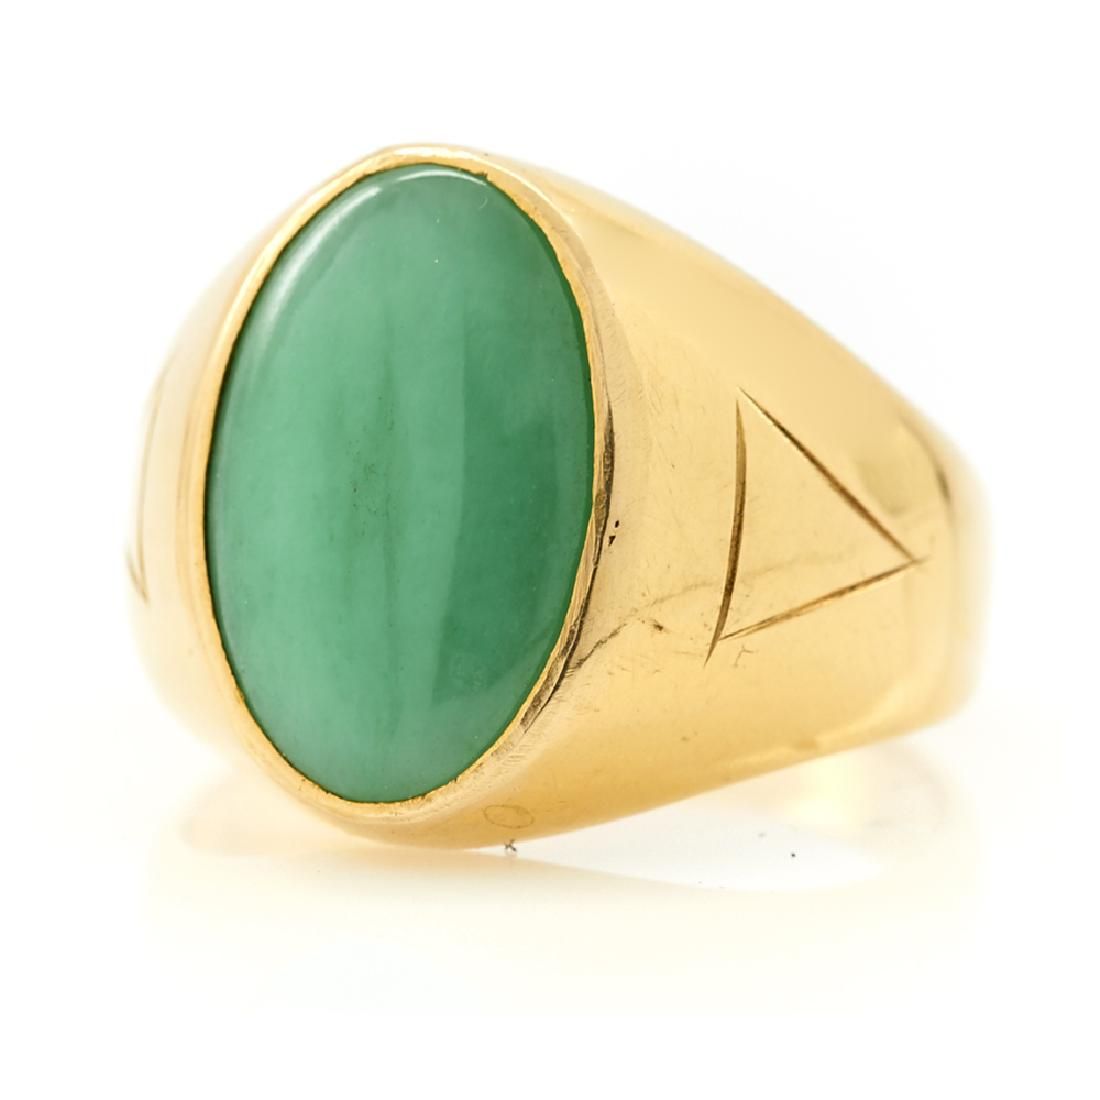 22K YELLOW GOLD AND JADE RING WITH